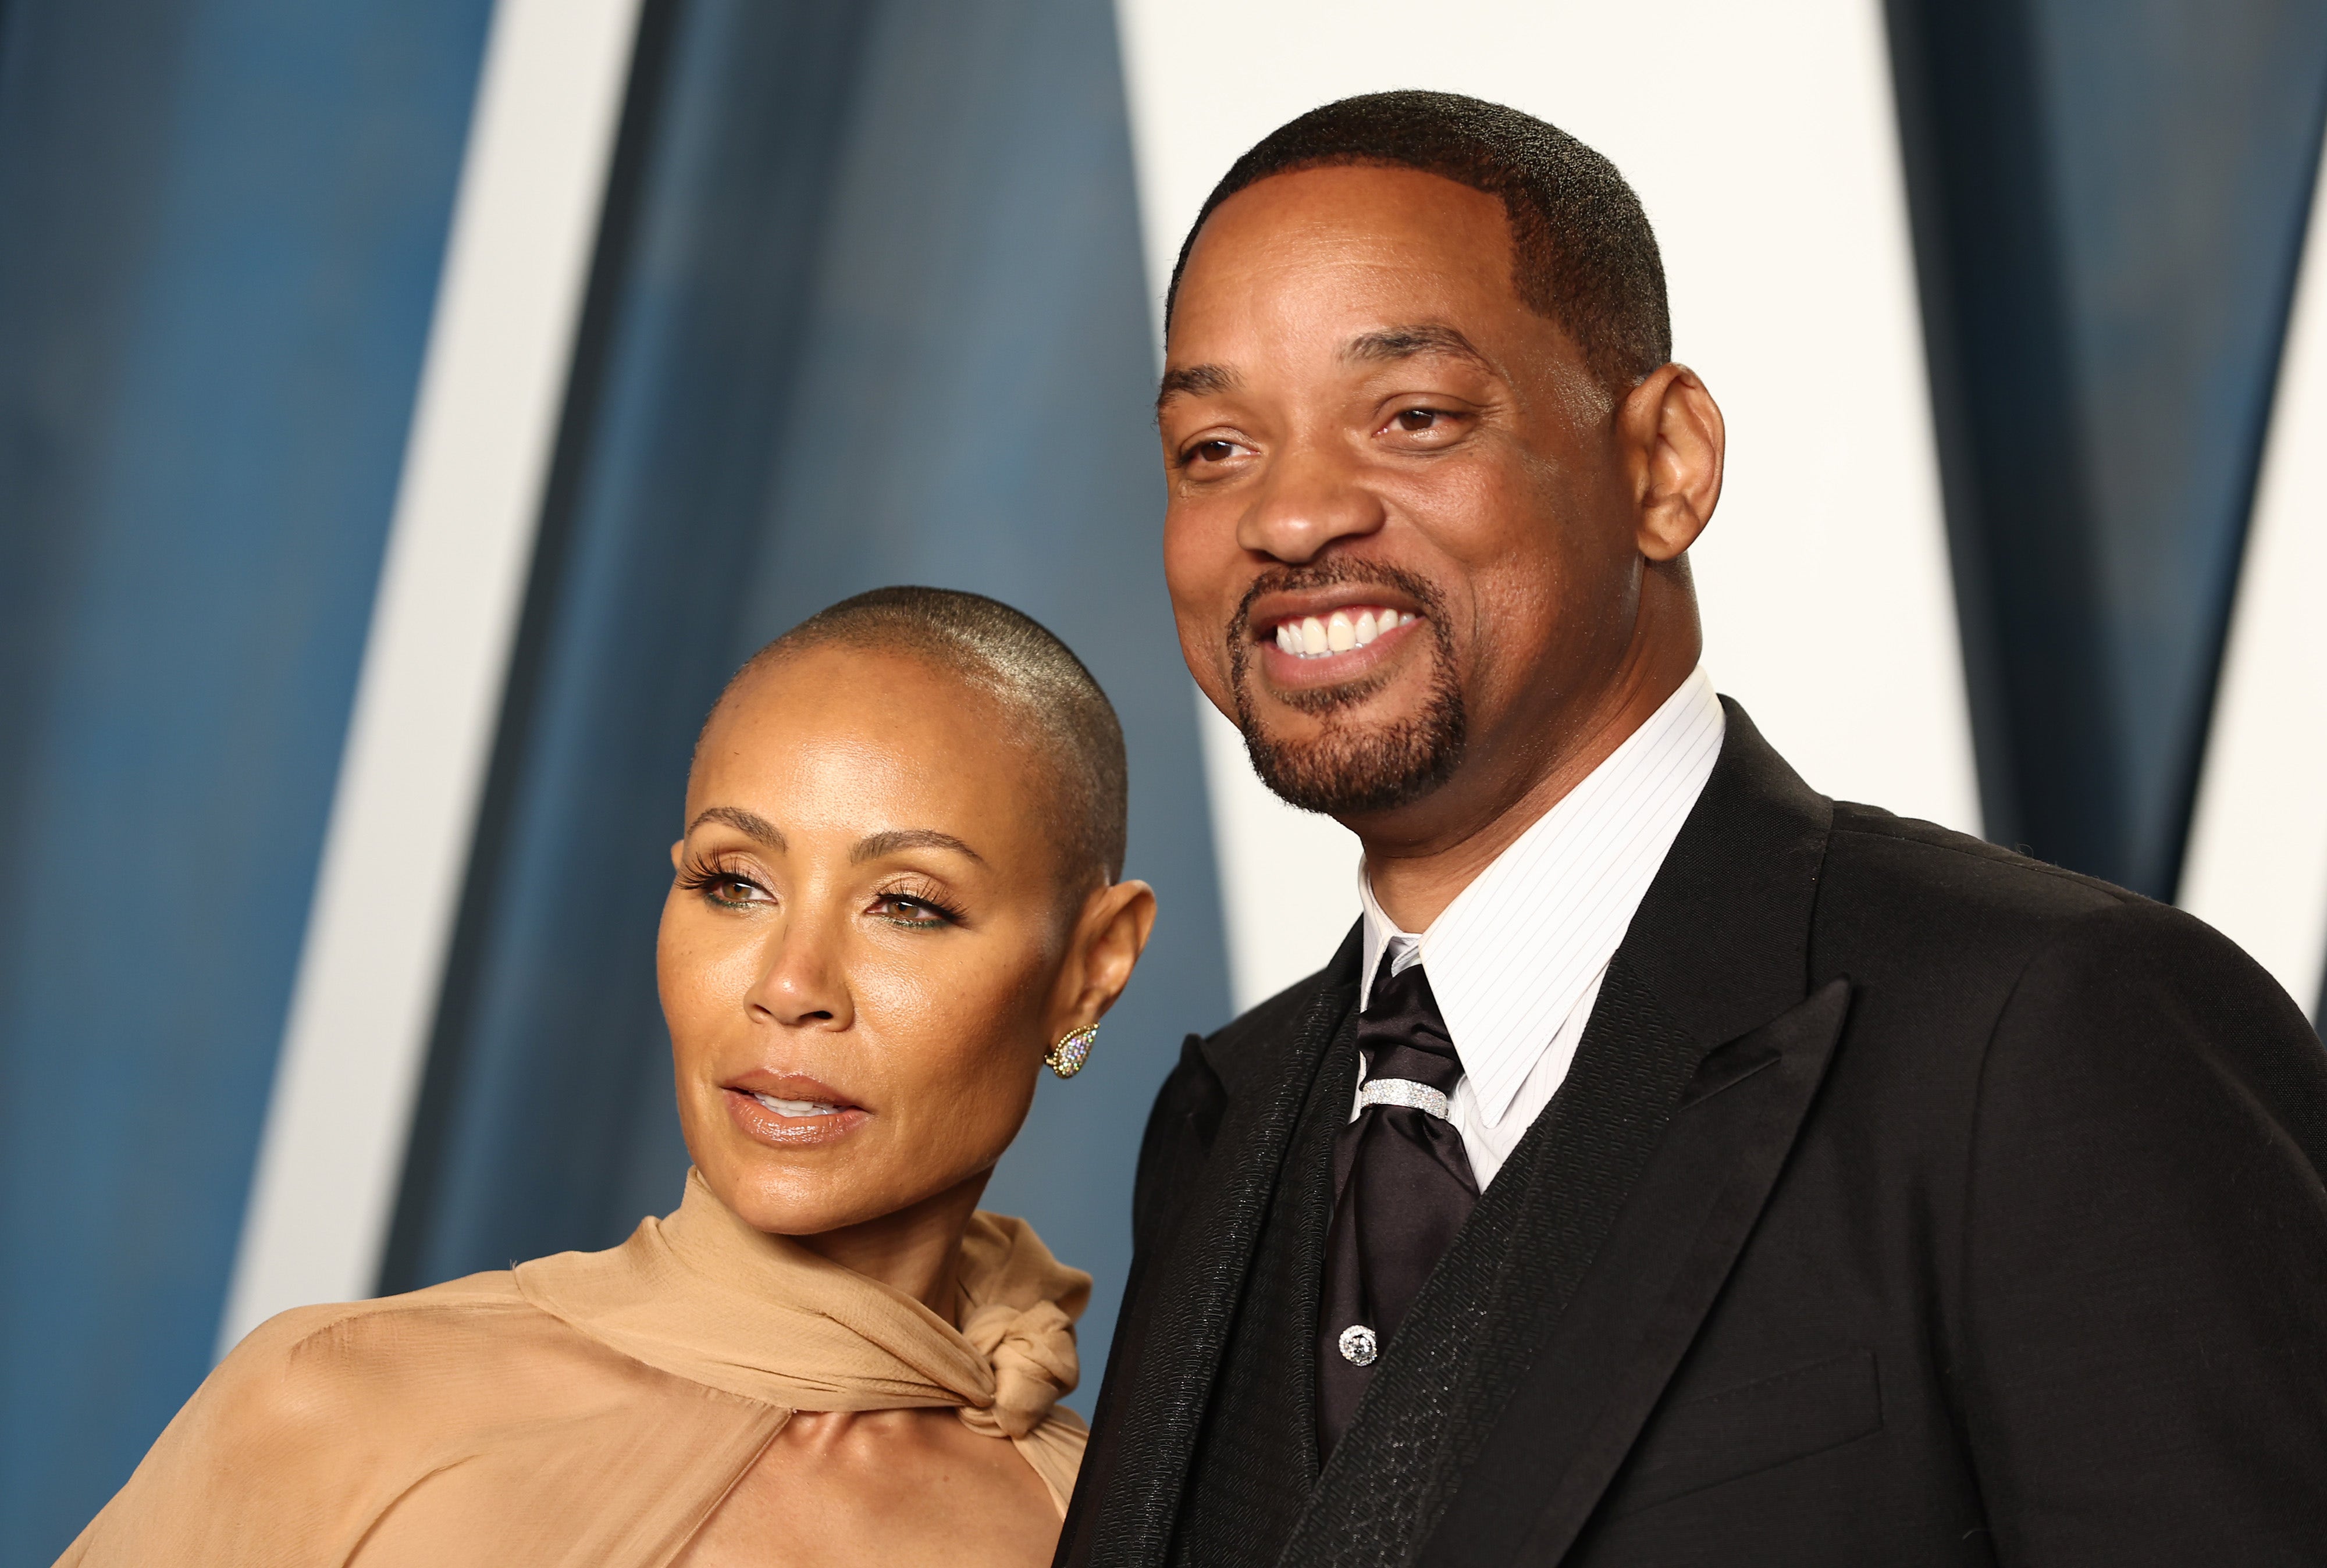 Jada Pinkett Smith slams rumors that Will Smith is gay, confesses she struggled with suicidal thoughts